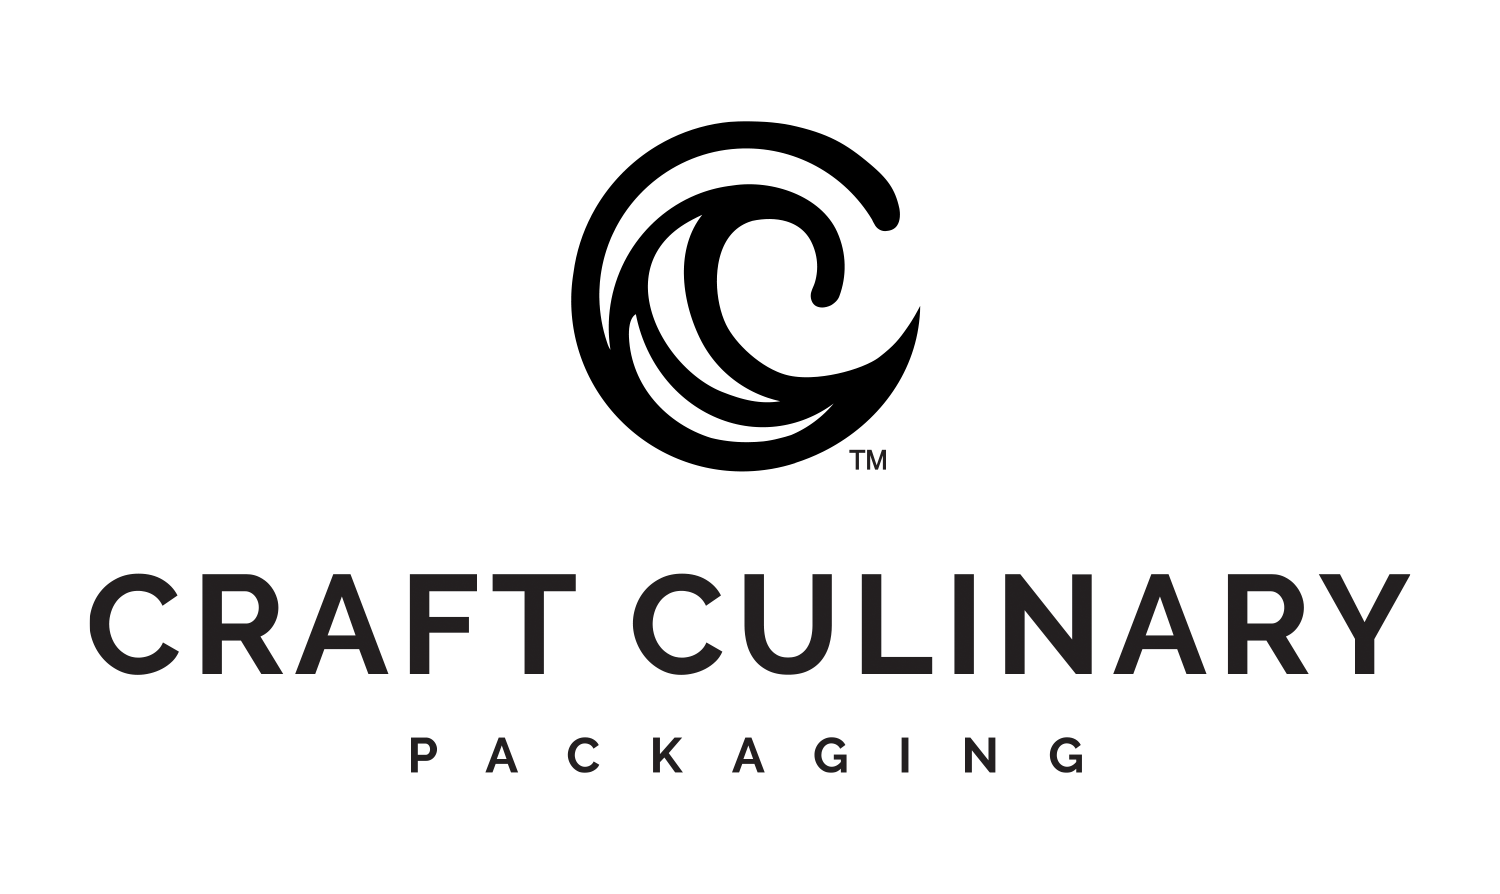 Craft Culinary Packaging